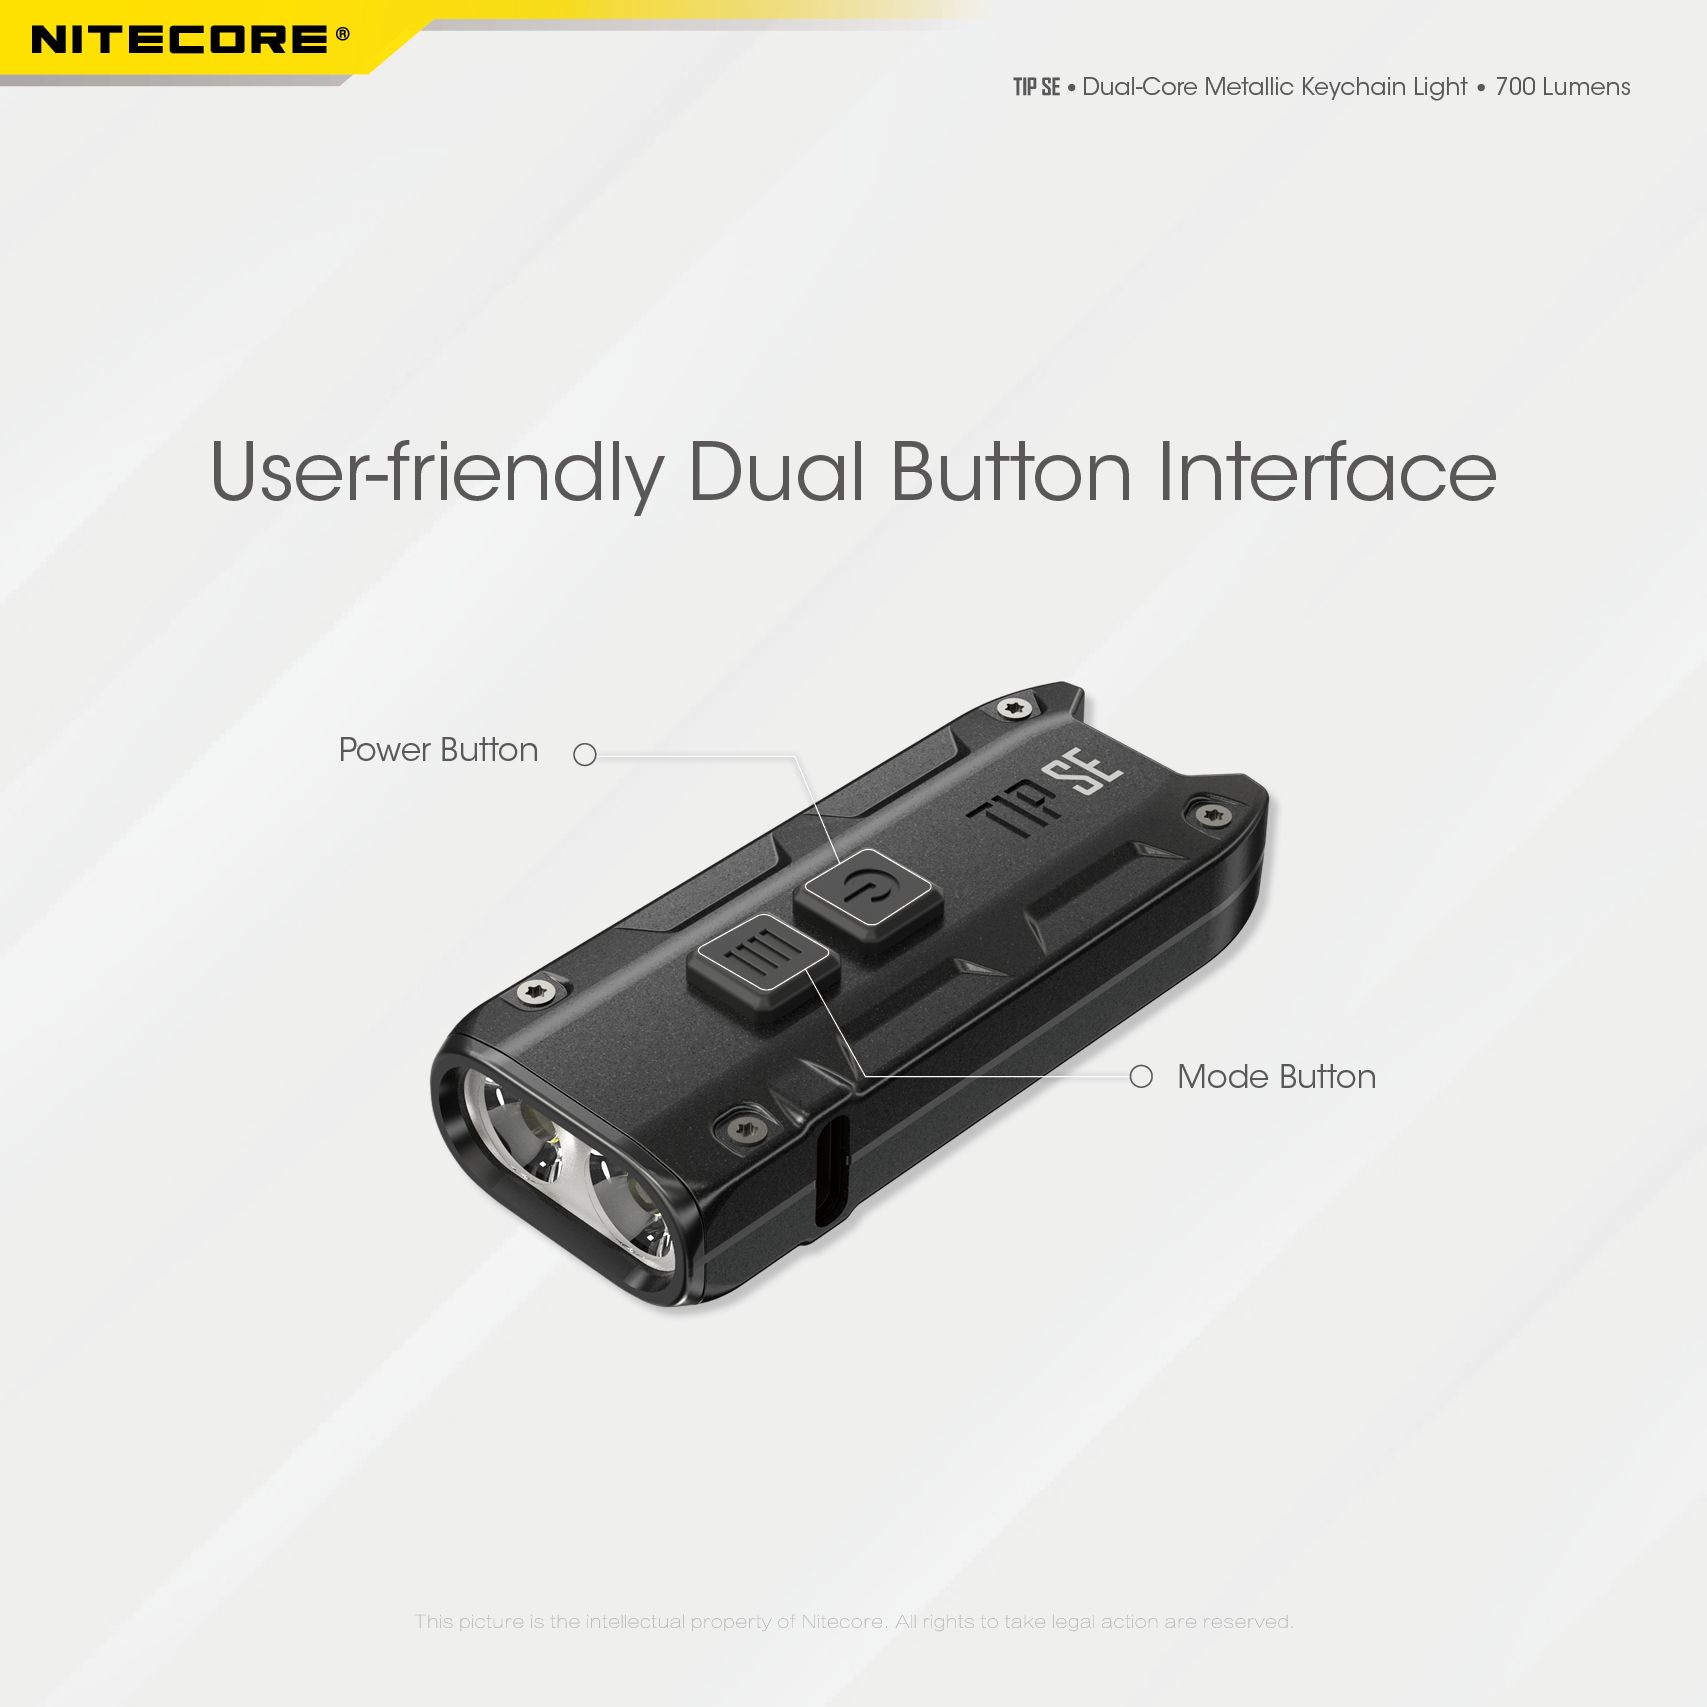 NITECORE-TIP-SE-700LM-P8-Dual-Light-LED-Keychain-Flashlight-Type-C-Rechargeable-QC-Every-Day-Carry-M-1976045-10